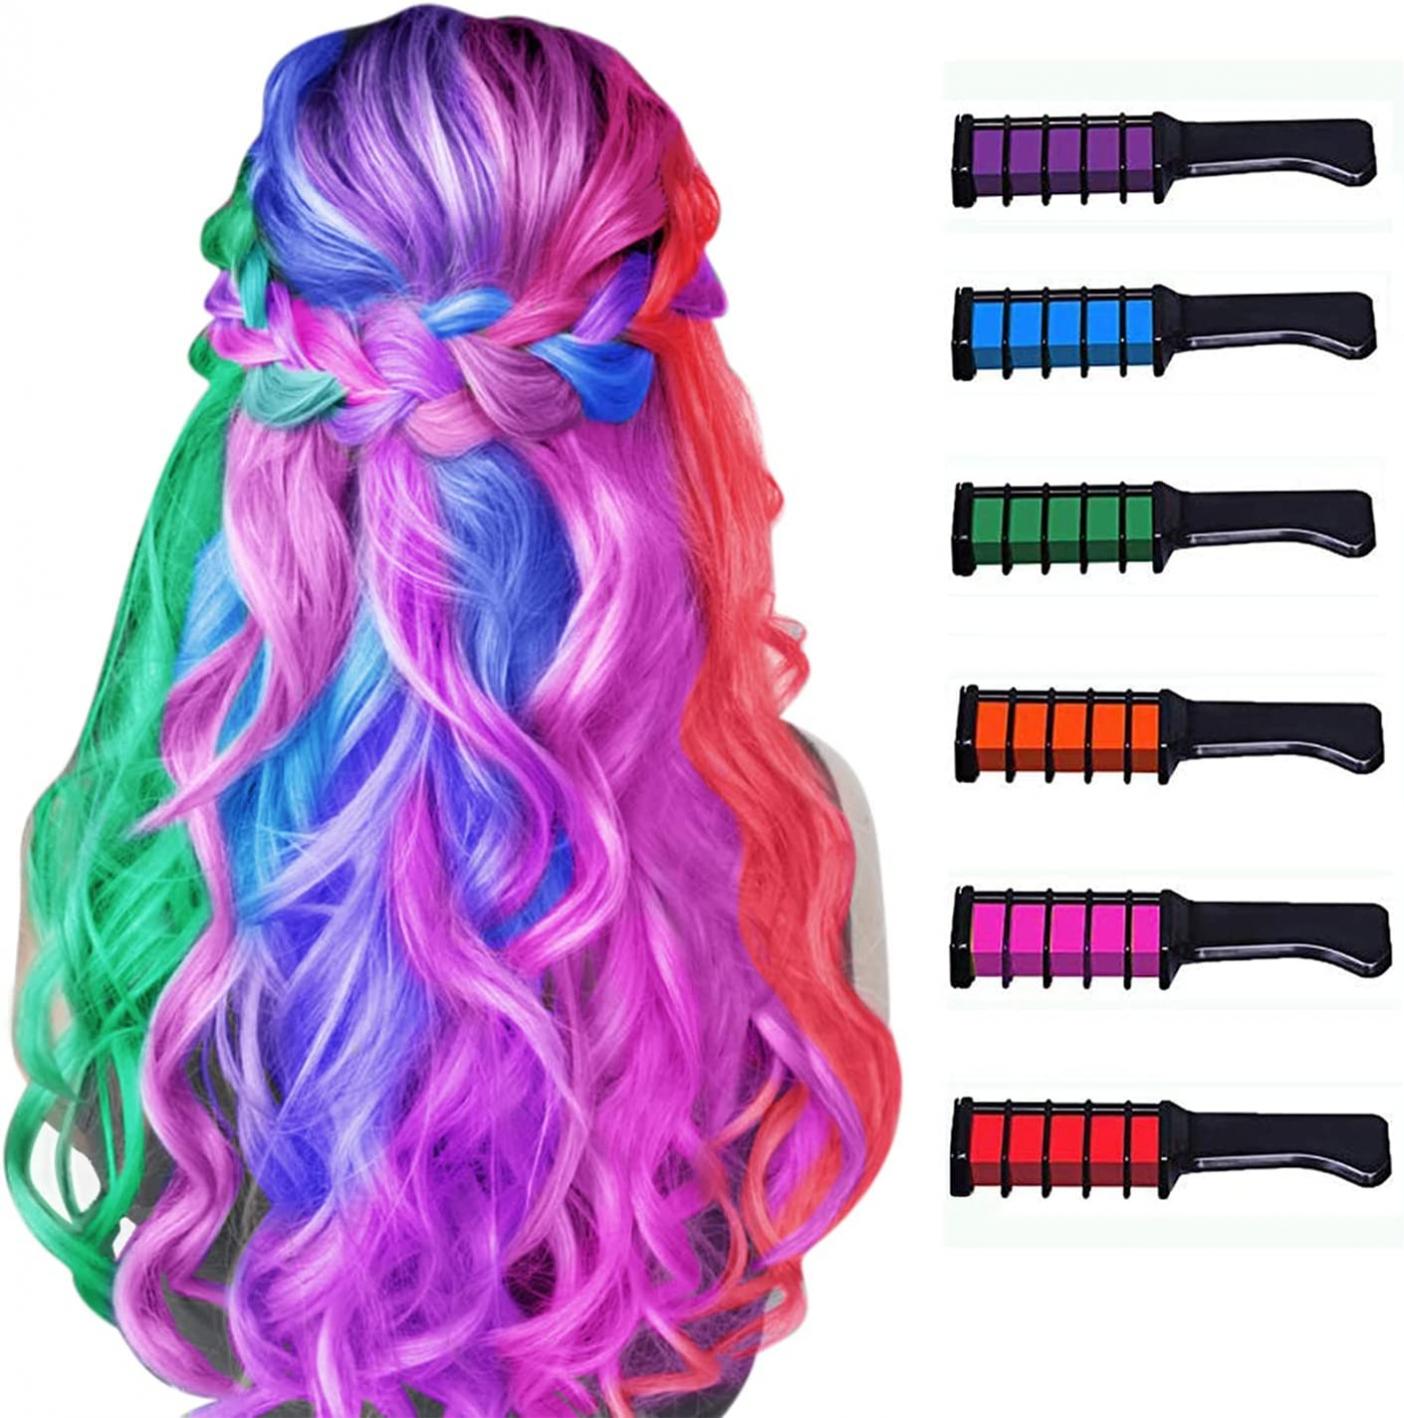 New Hair Chalk Comb Temporary Hair Color Dye for Girls Kids, Washable Hair Chalk for Girls Age 4 5 6 7 8 9 10 Birthday Cosplay DIY, Christmas,New Year 6 Colors